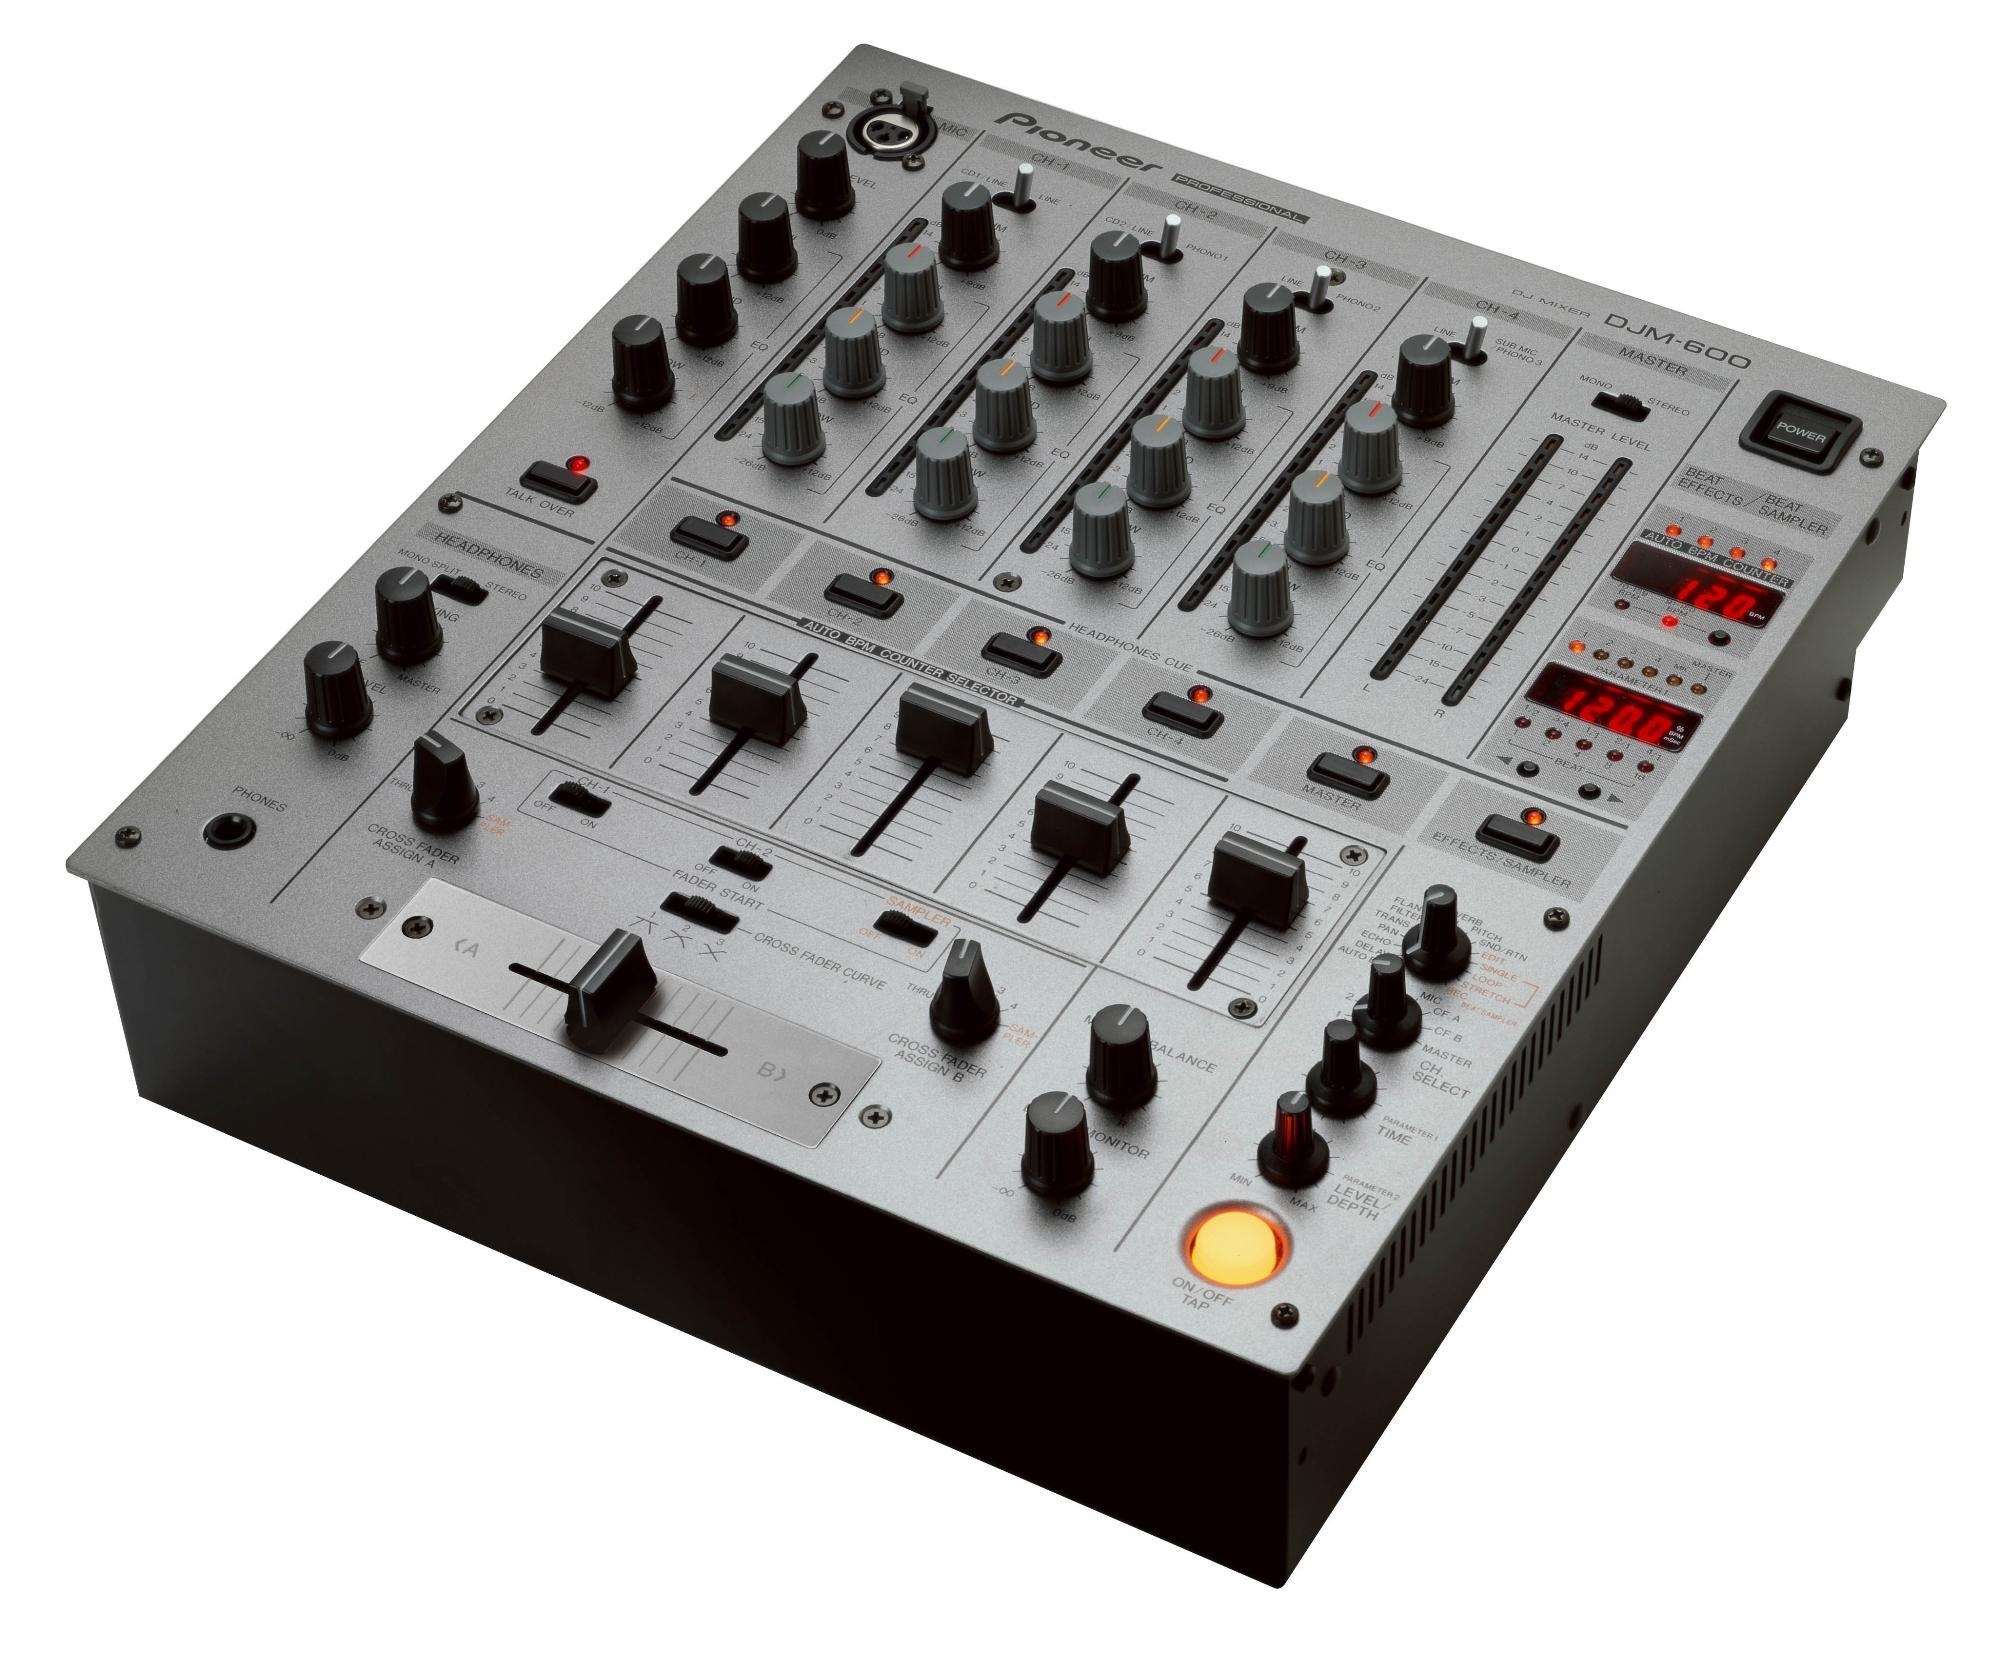 Used Pioneer DJM 600 for sale – Acoustic Control